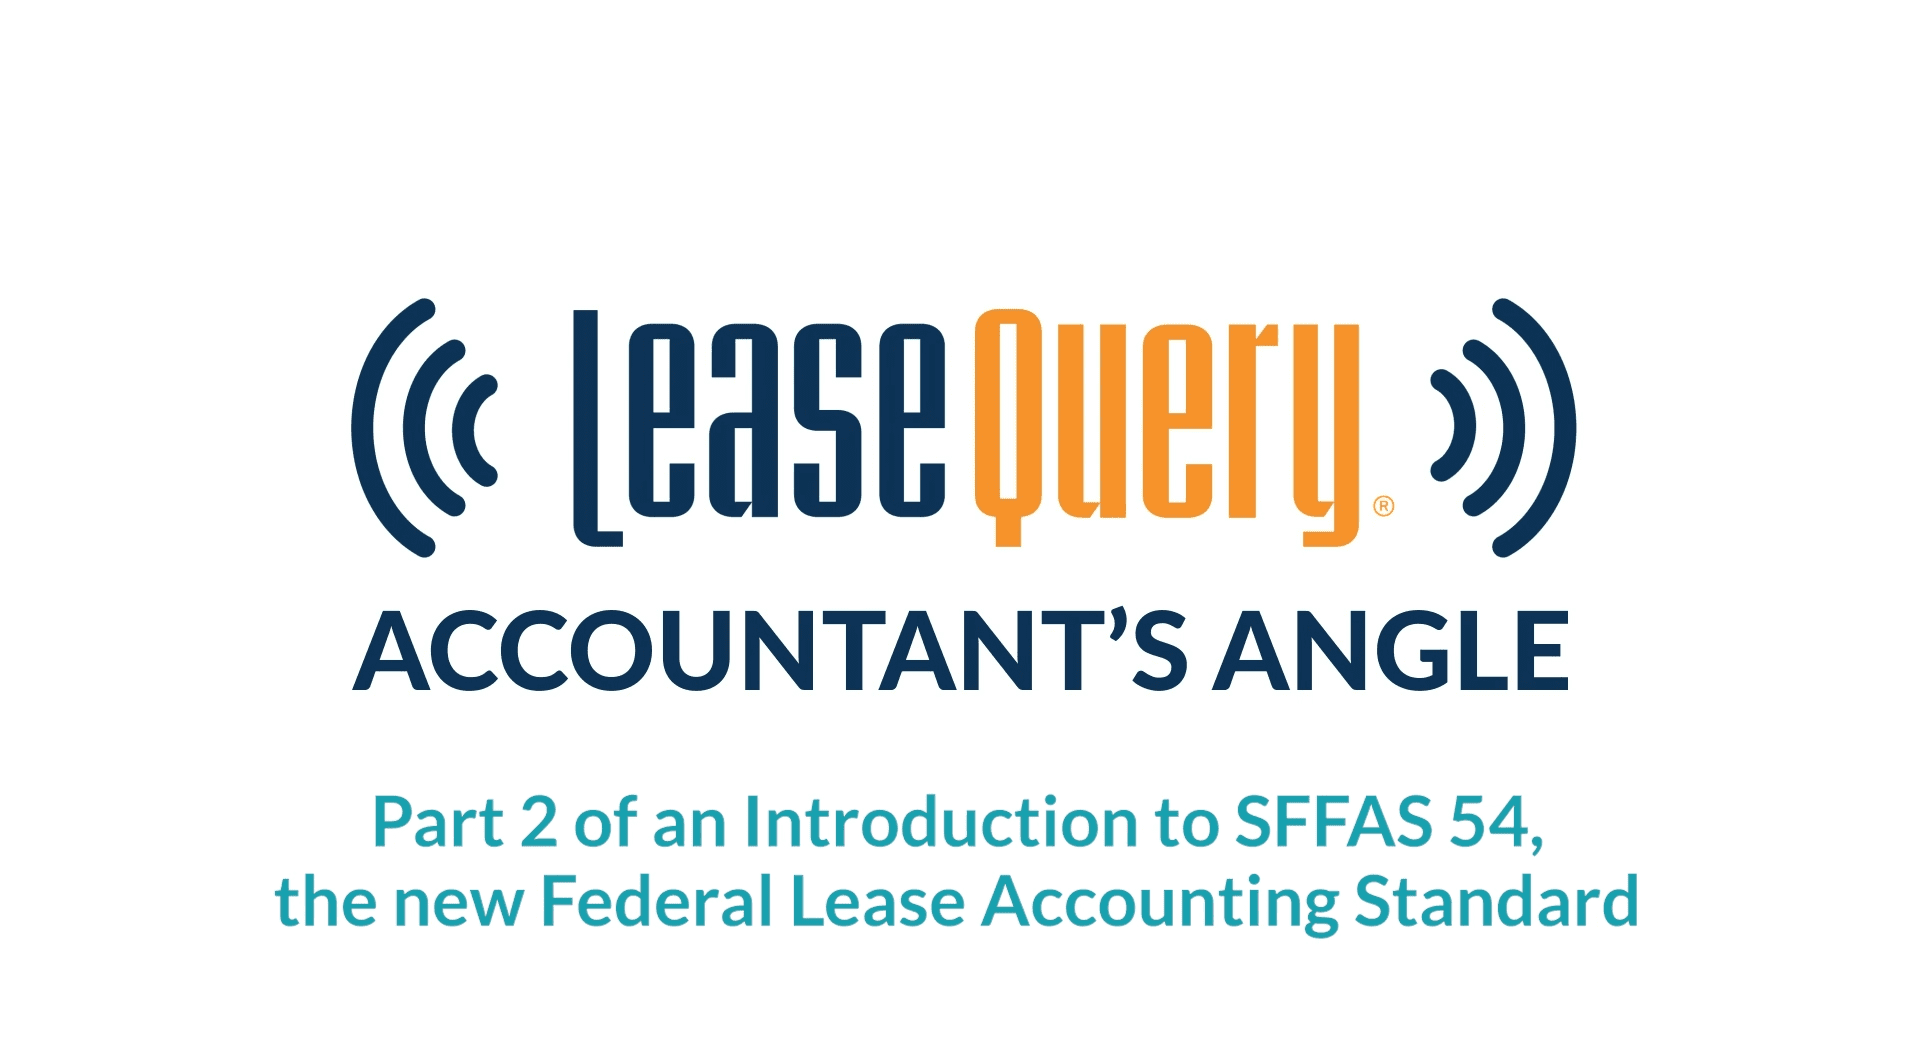 Episode 17: Part 2 of an Introduction to SFFAS 54, the new Federal Lease Accounting Standard | Accountant’s Angle Podcast